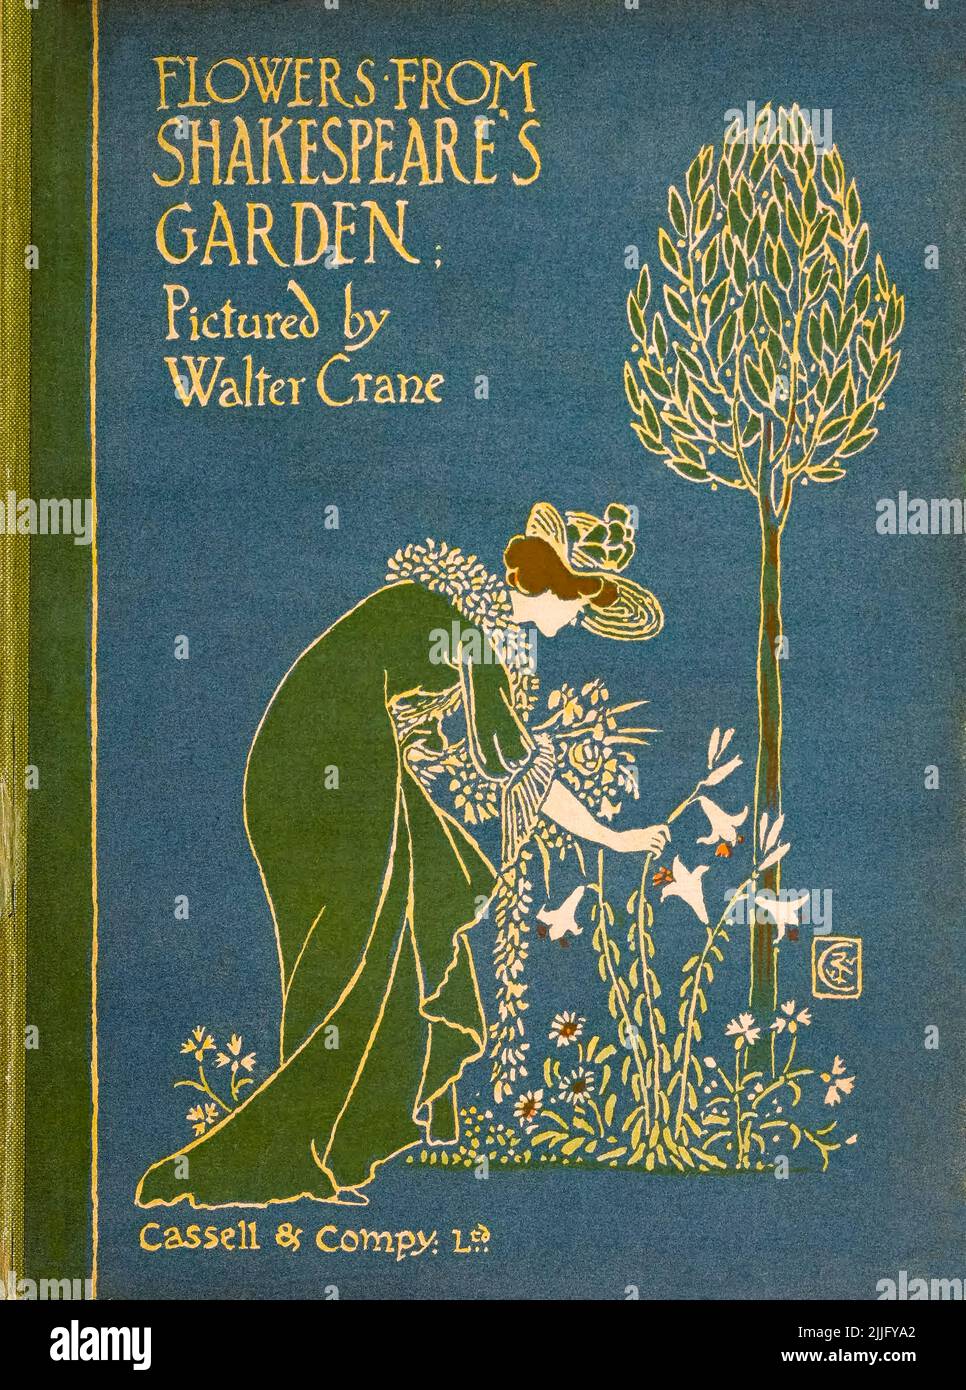 Flowers from Shakespeare's garden, a posy from the plays, book cover design illustration by Walter Crane, 1909 Stock Photo